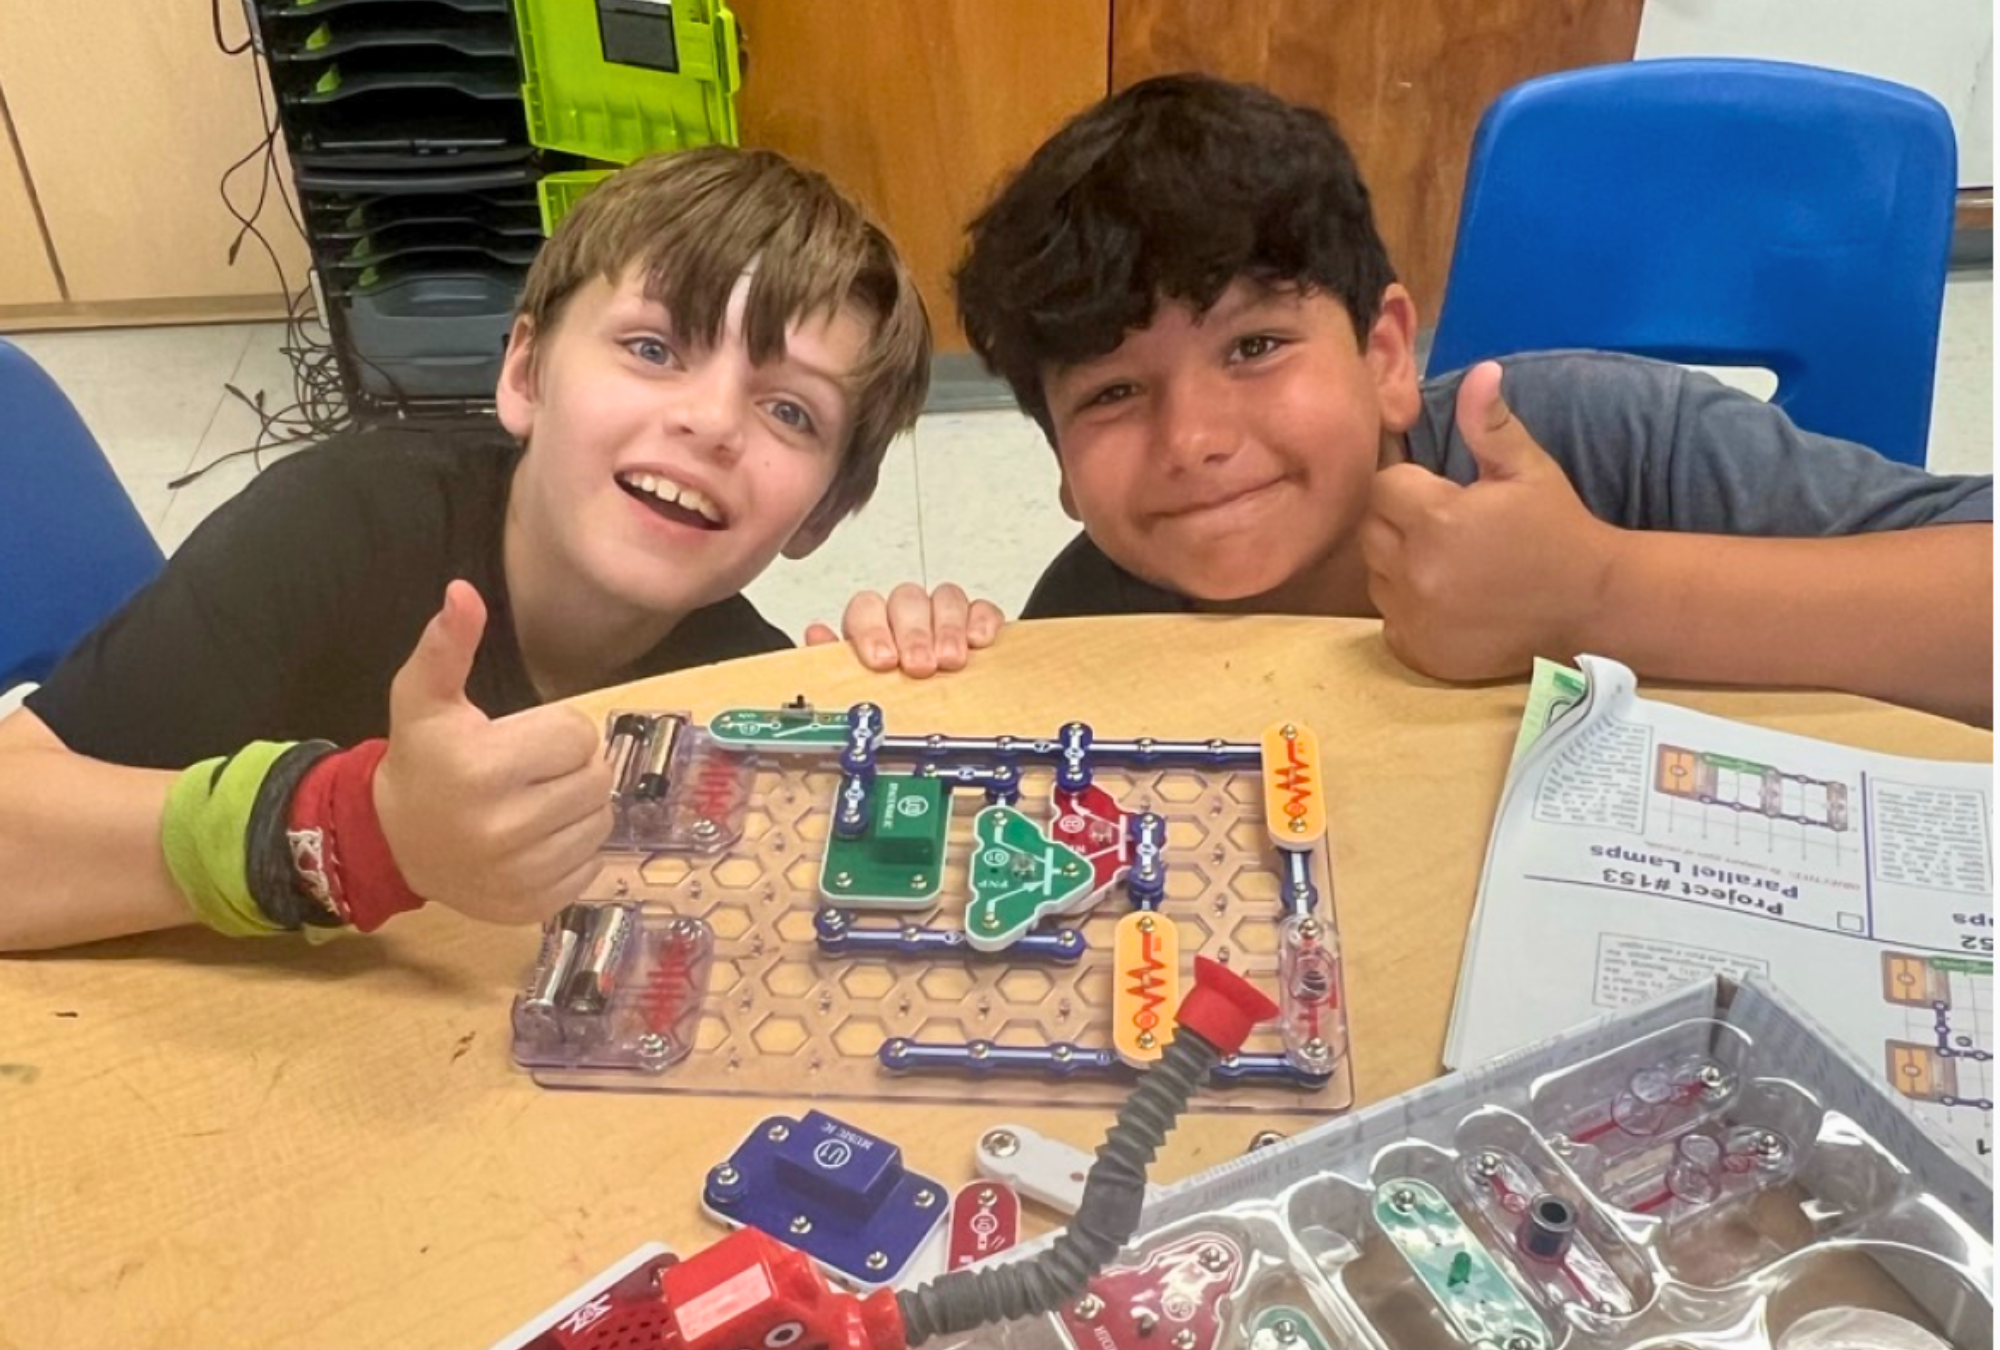 Friends display the electronic grid they build at Y STEAM camp